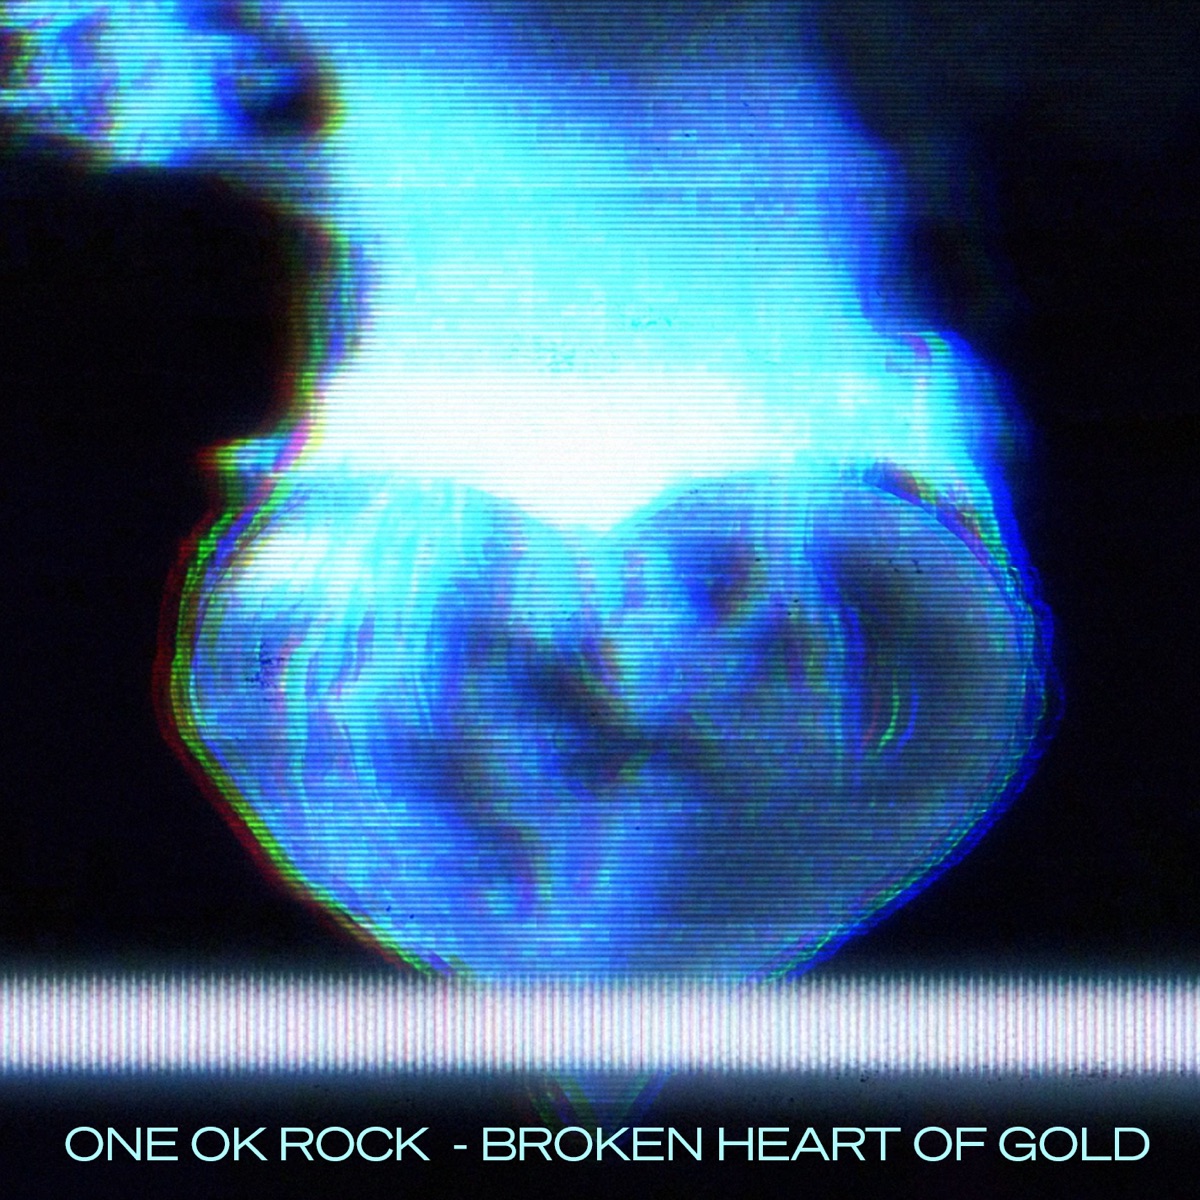 Cover for『ONE OK ROCK - Broken Heart Of Gold』from the release『Broken Heart Of Gold』